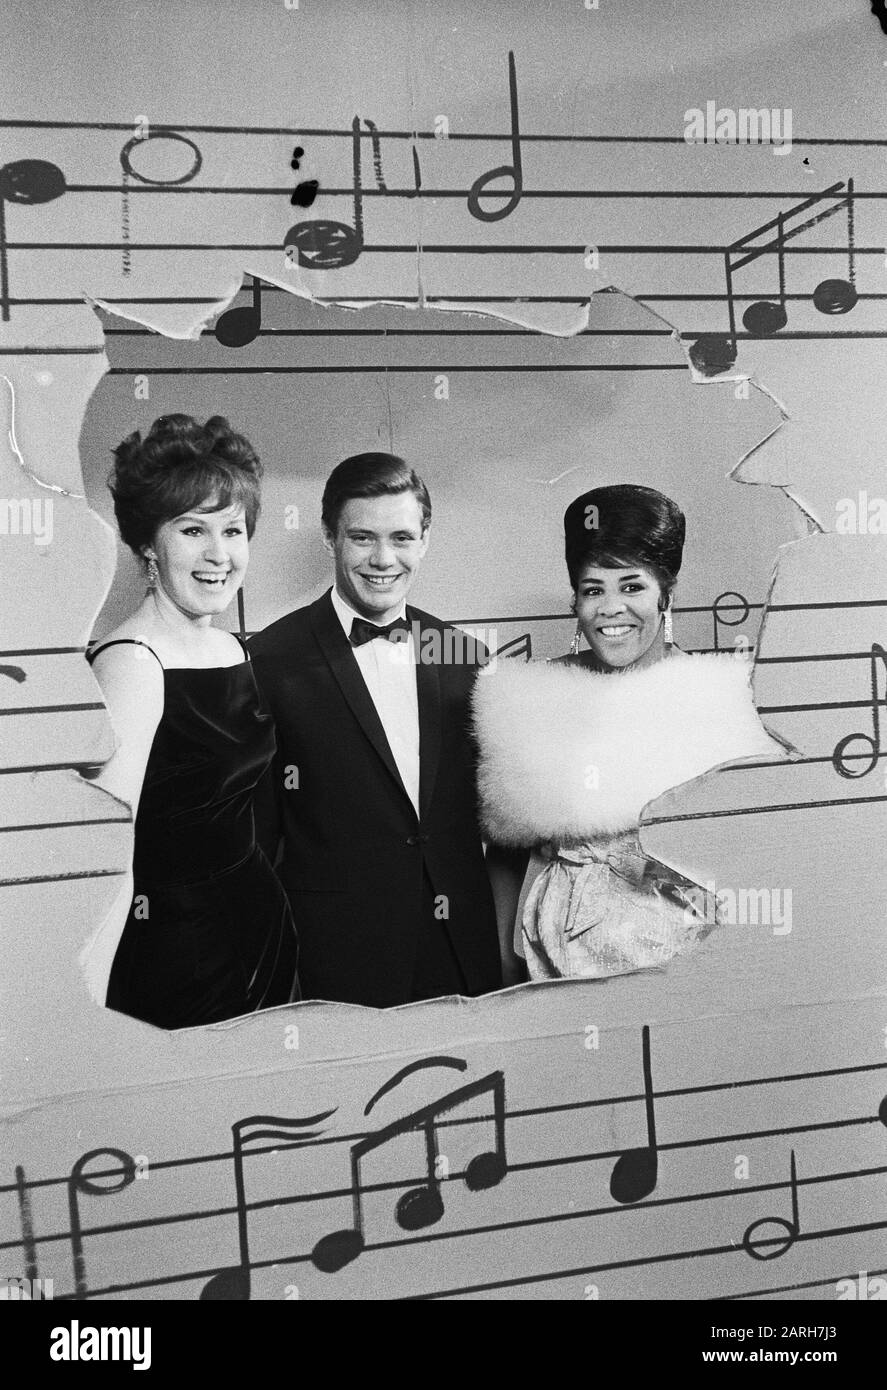 Vara television brings music program by Cole Porter. As soloists perform Jenny Veeninga, Rob de Nijs, and Milly Scot Date: September 20, 1963 Keywords: MUSIC PROGRAMMAS, soloists Institution name: VARA Stock Photo